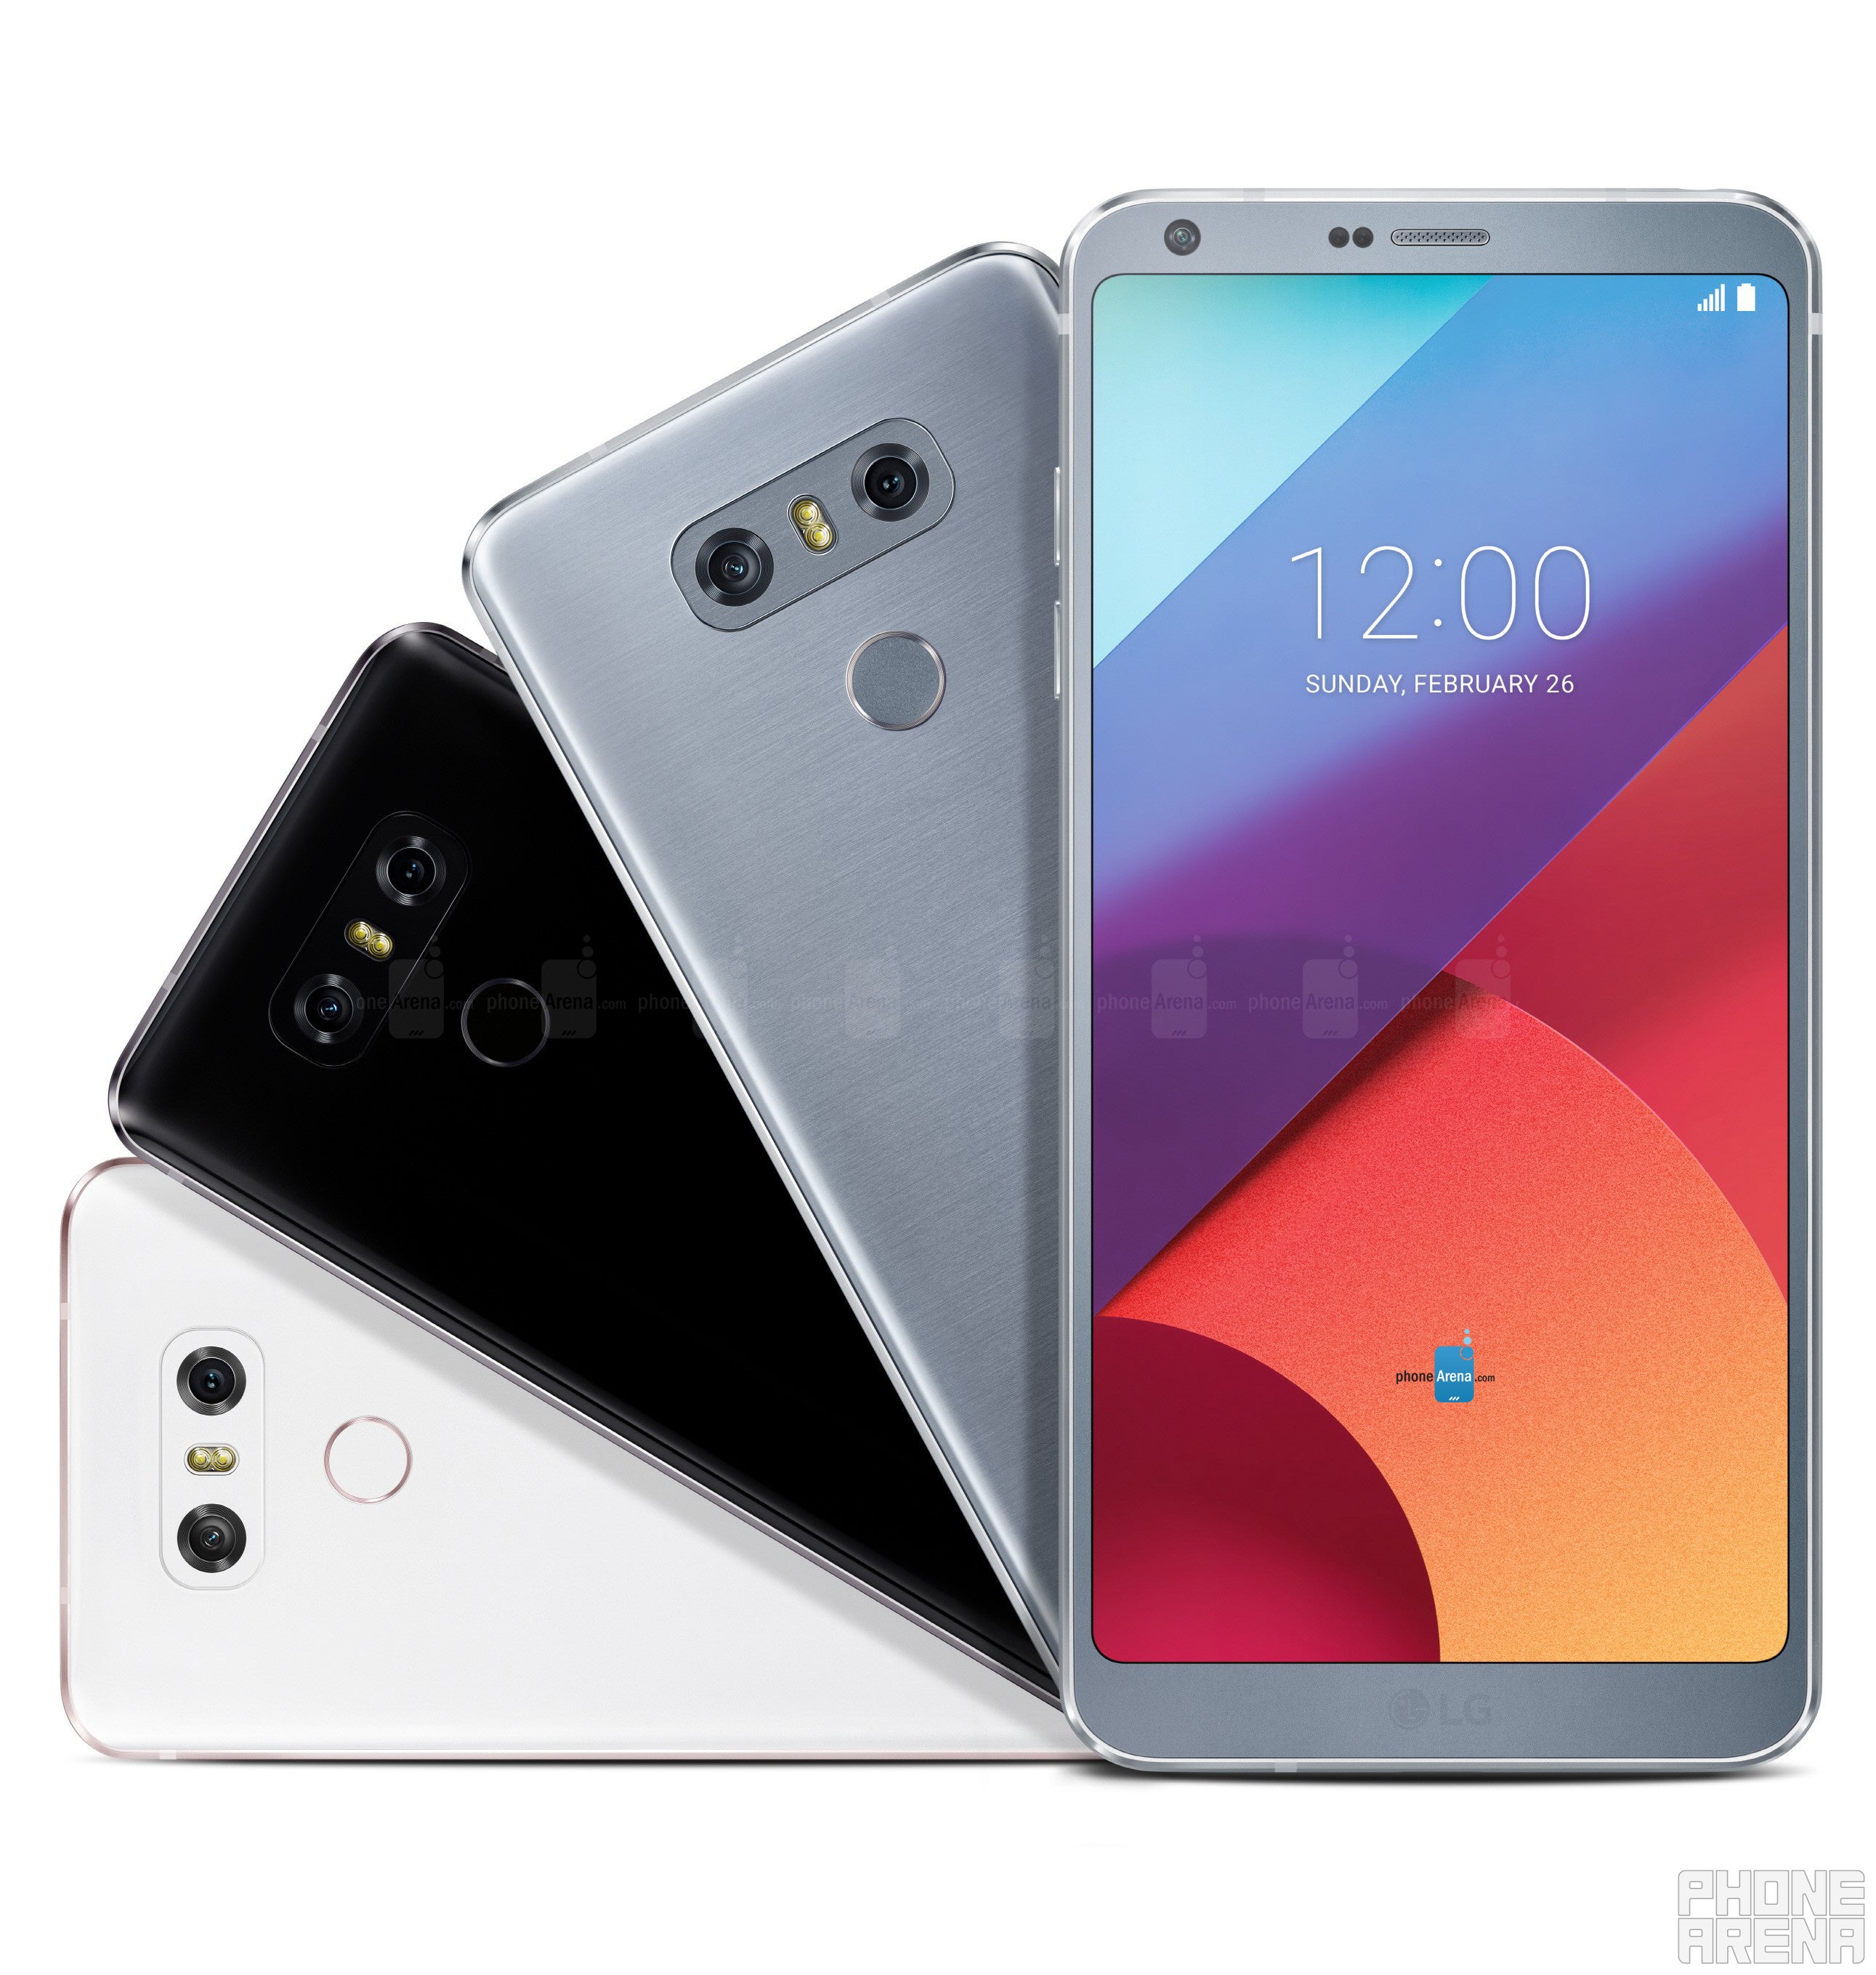 The LG G6 features an innovative FullVision display that&#039;s taller than that of most phones - What the Galaxy S8/S8+ and the LG G6 may look like next to an almost bezel-less iPhone 8